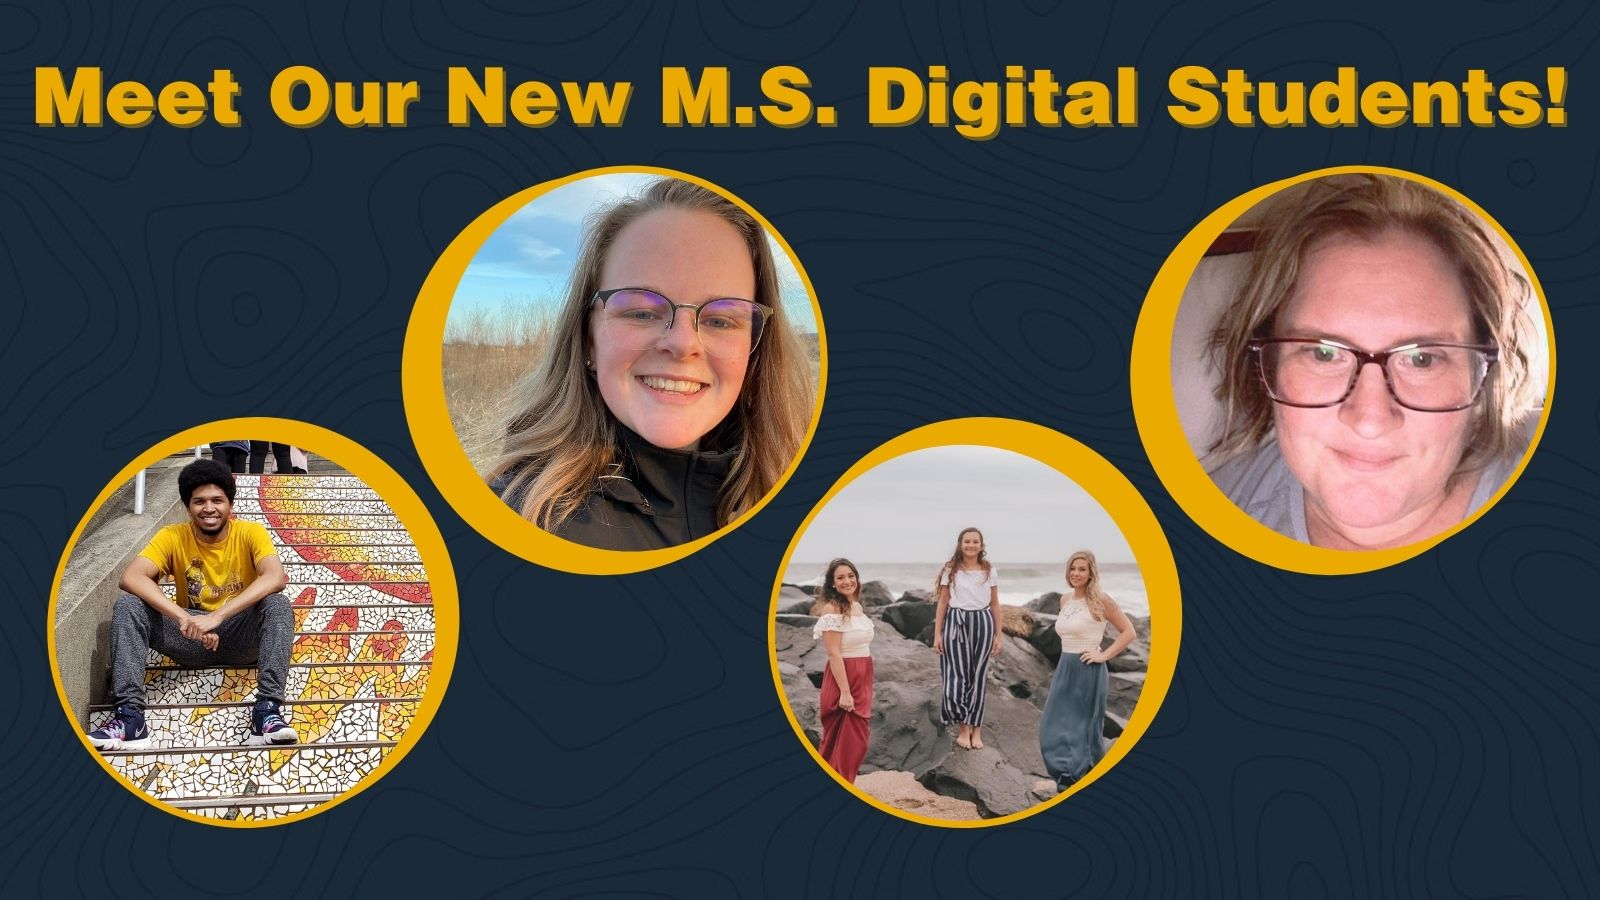 Meet our new M.S. Digital Students